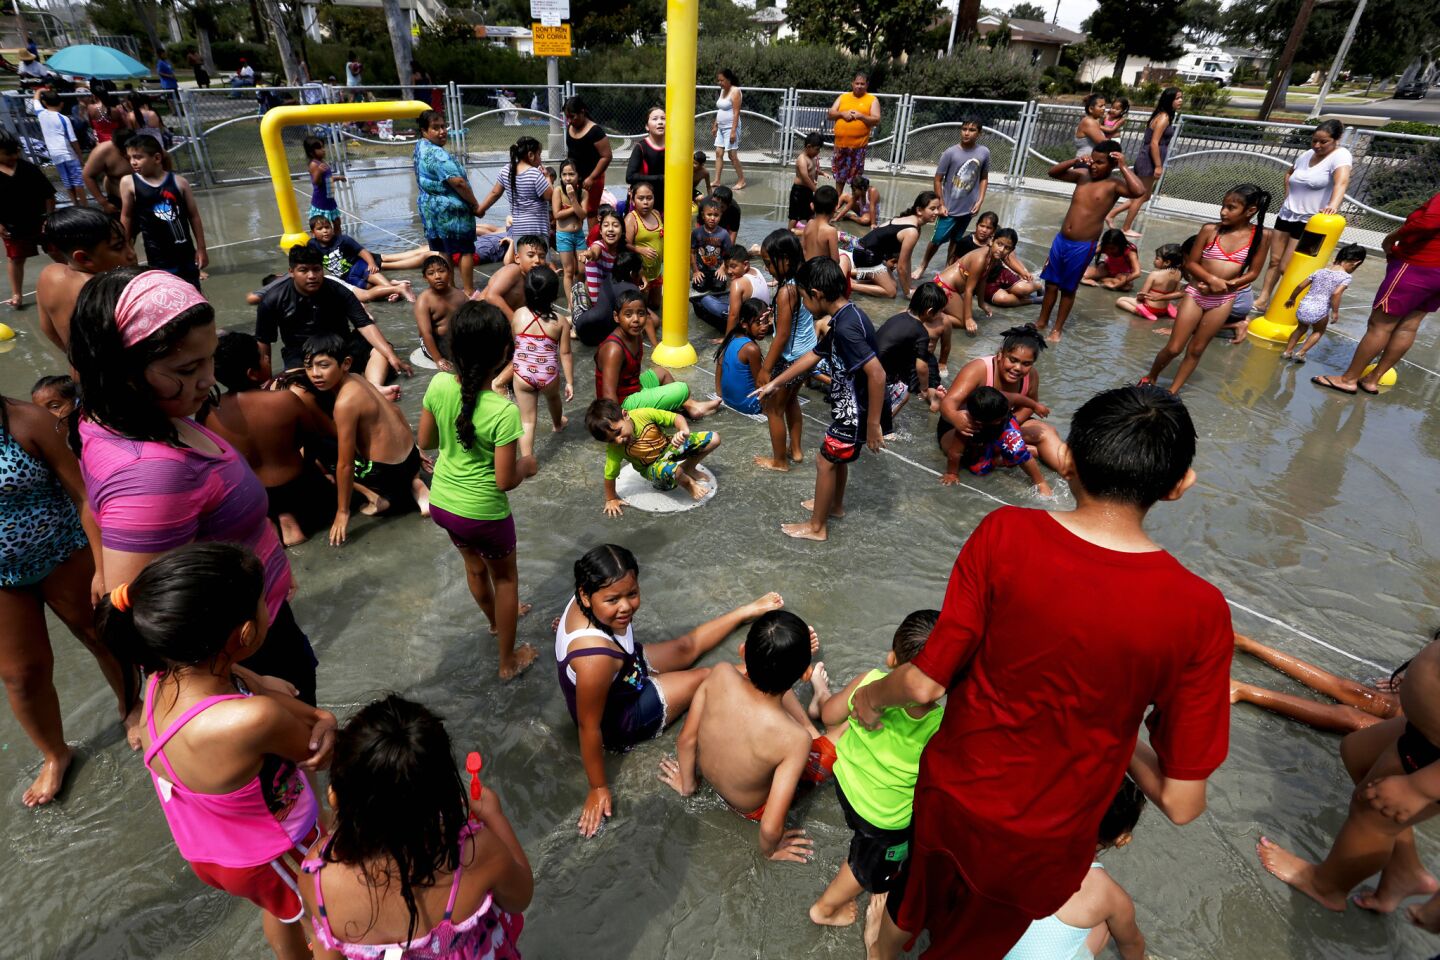 The crowd waits for the water to return after a brief break in the spray pool at Fullerton's Lemon Park.